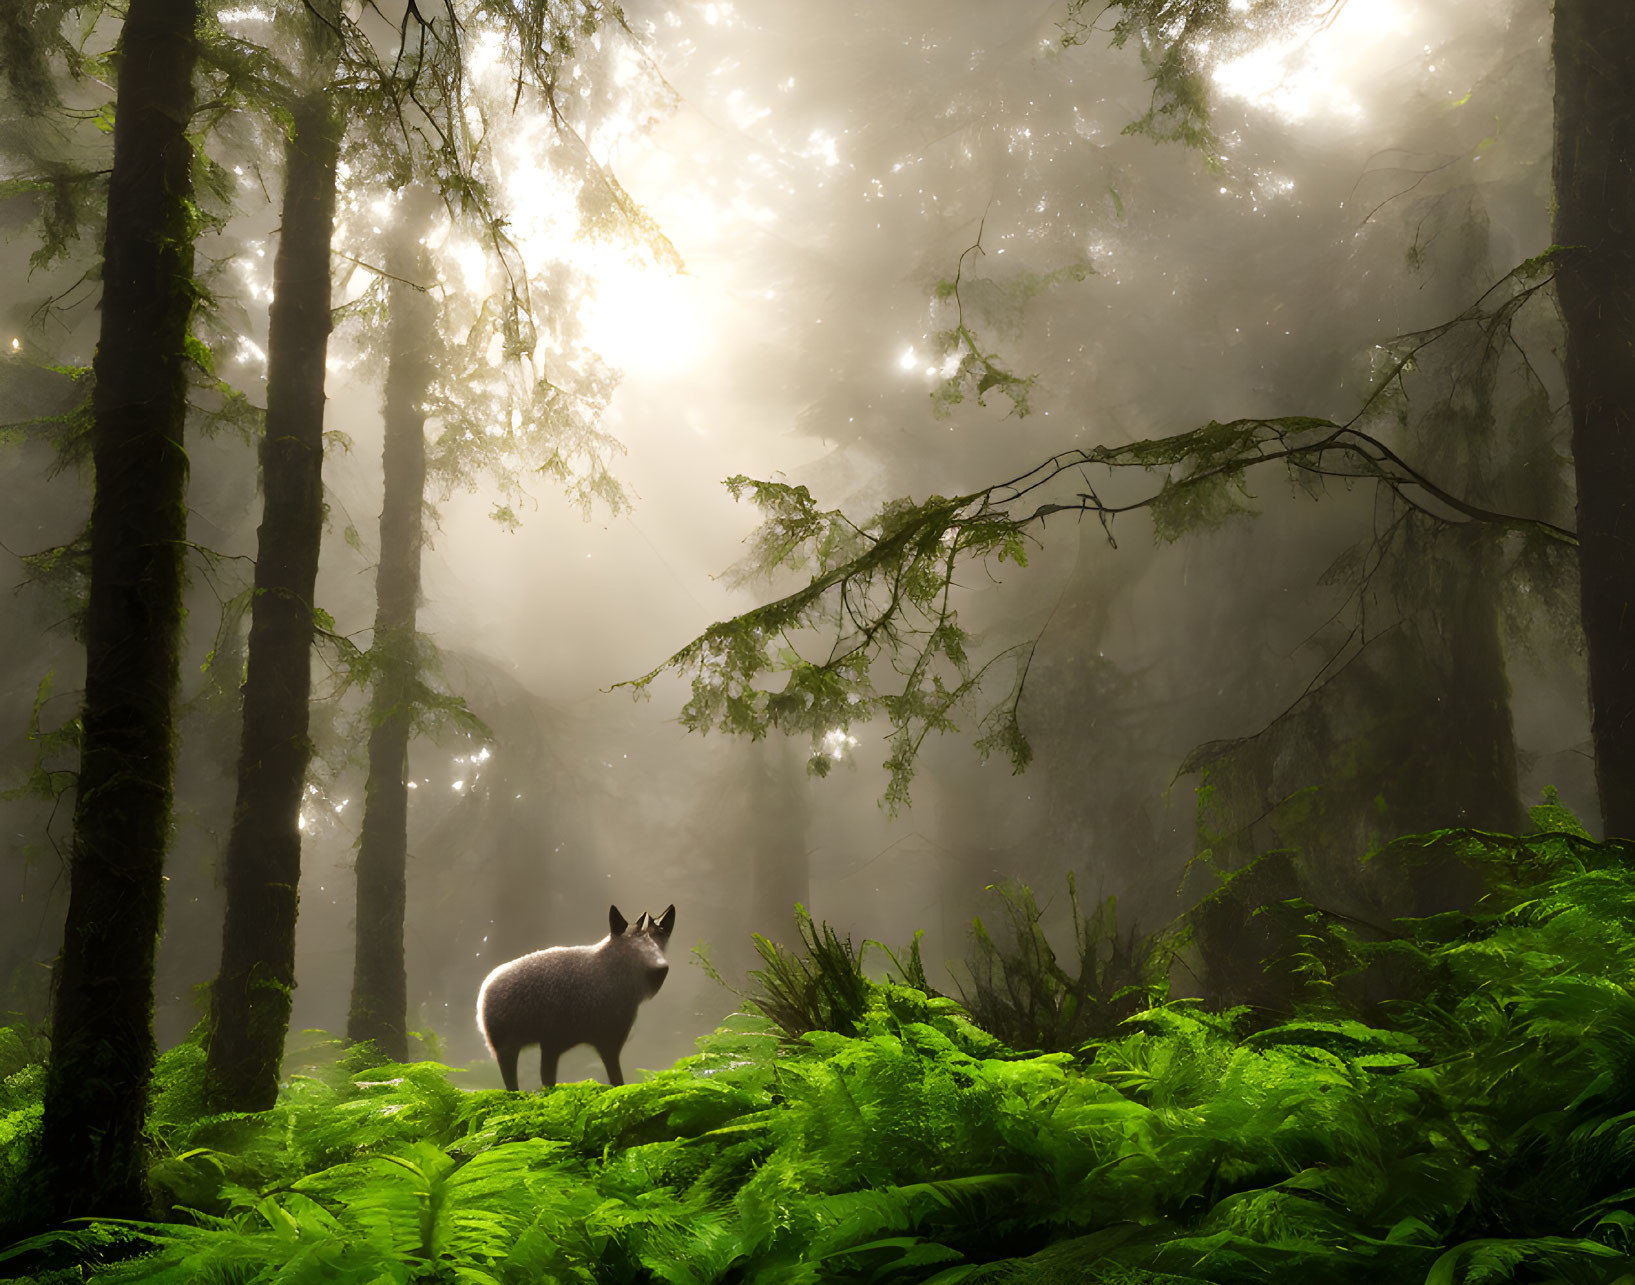 Mystical forest scene with lone fox in lush greenery